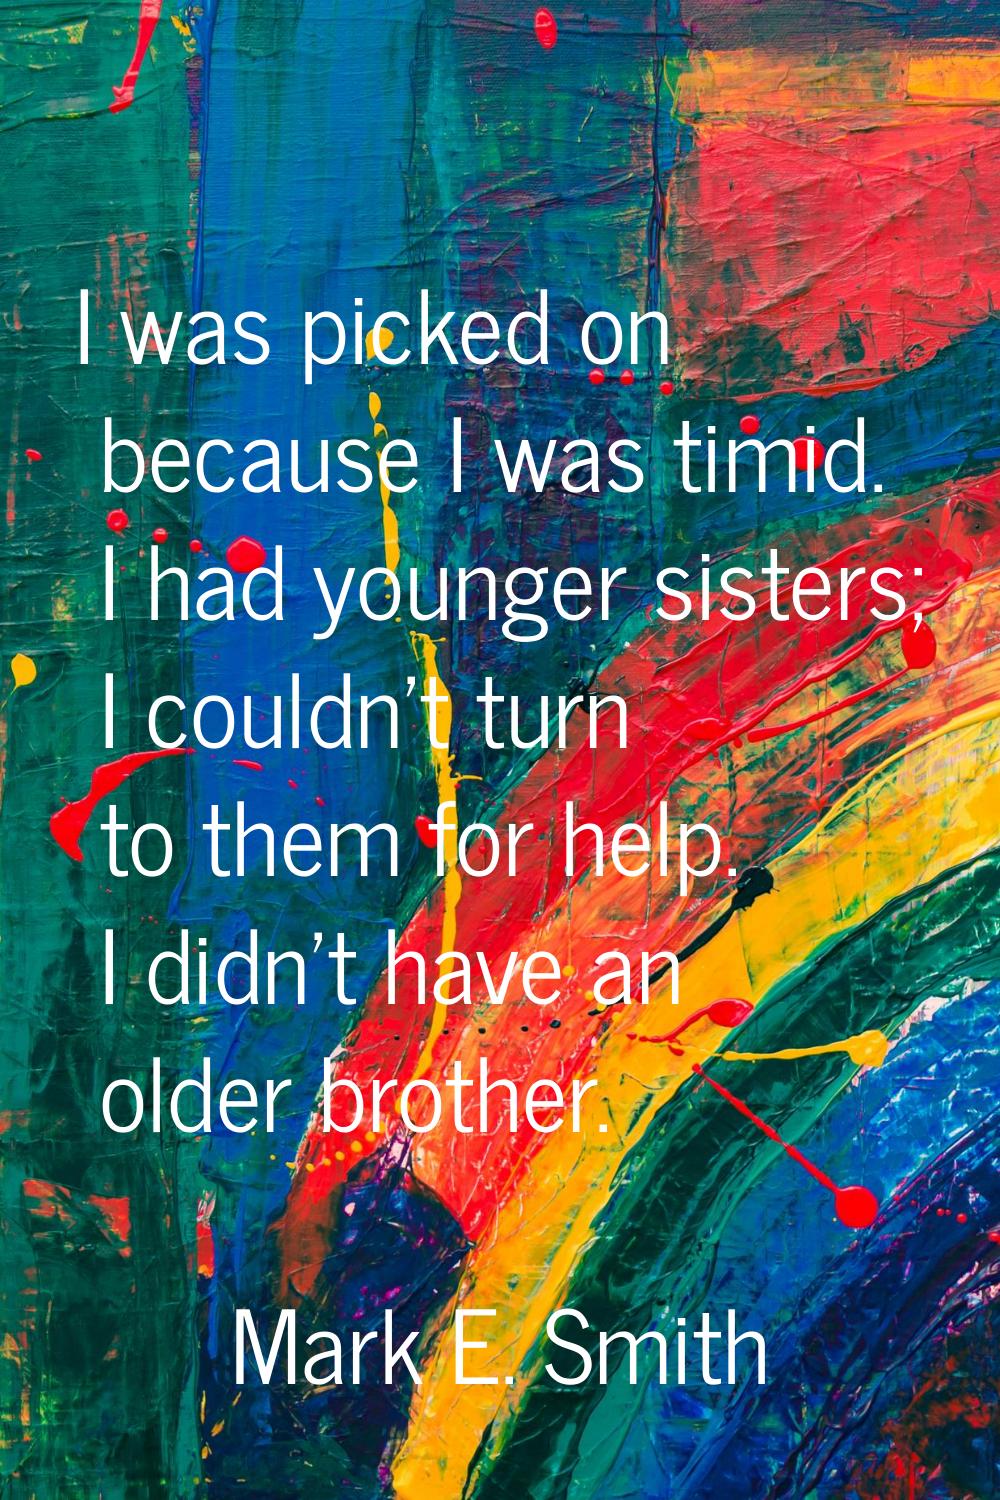 I was picked on because I was timid. I had younger sisters; I couldn't turn to them for help. I did